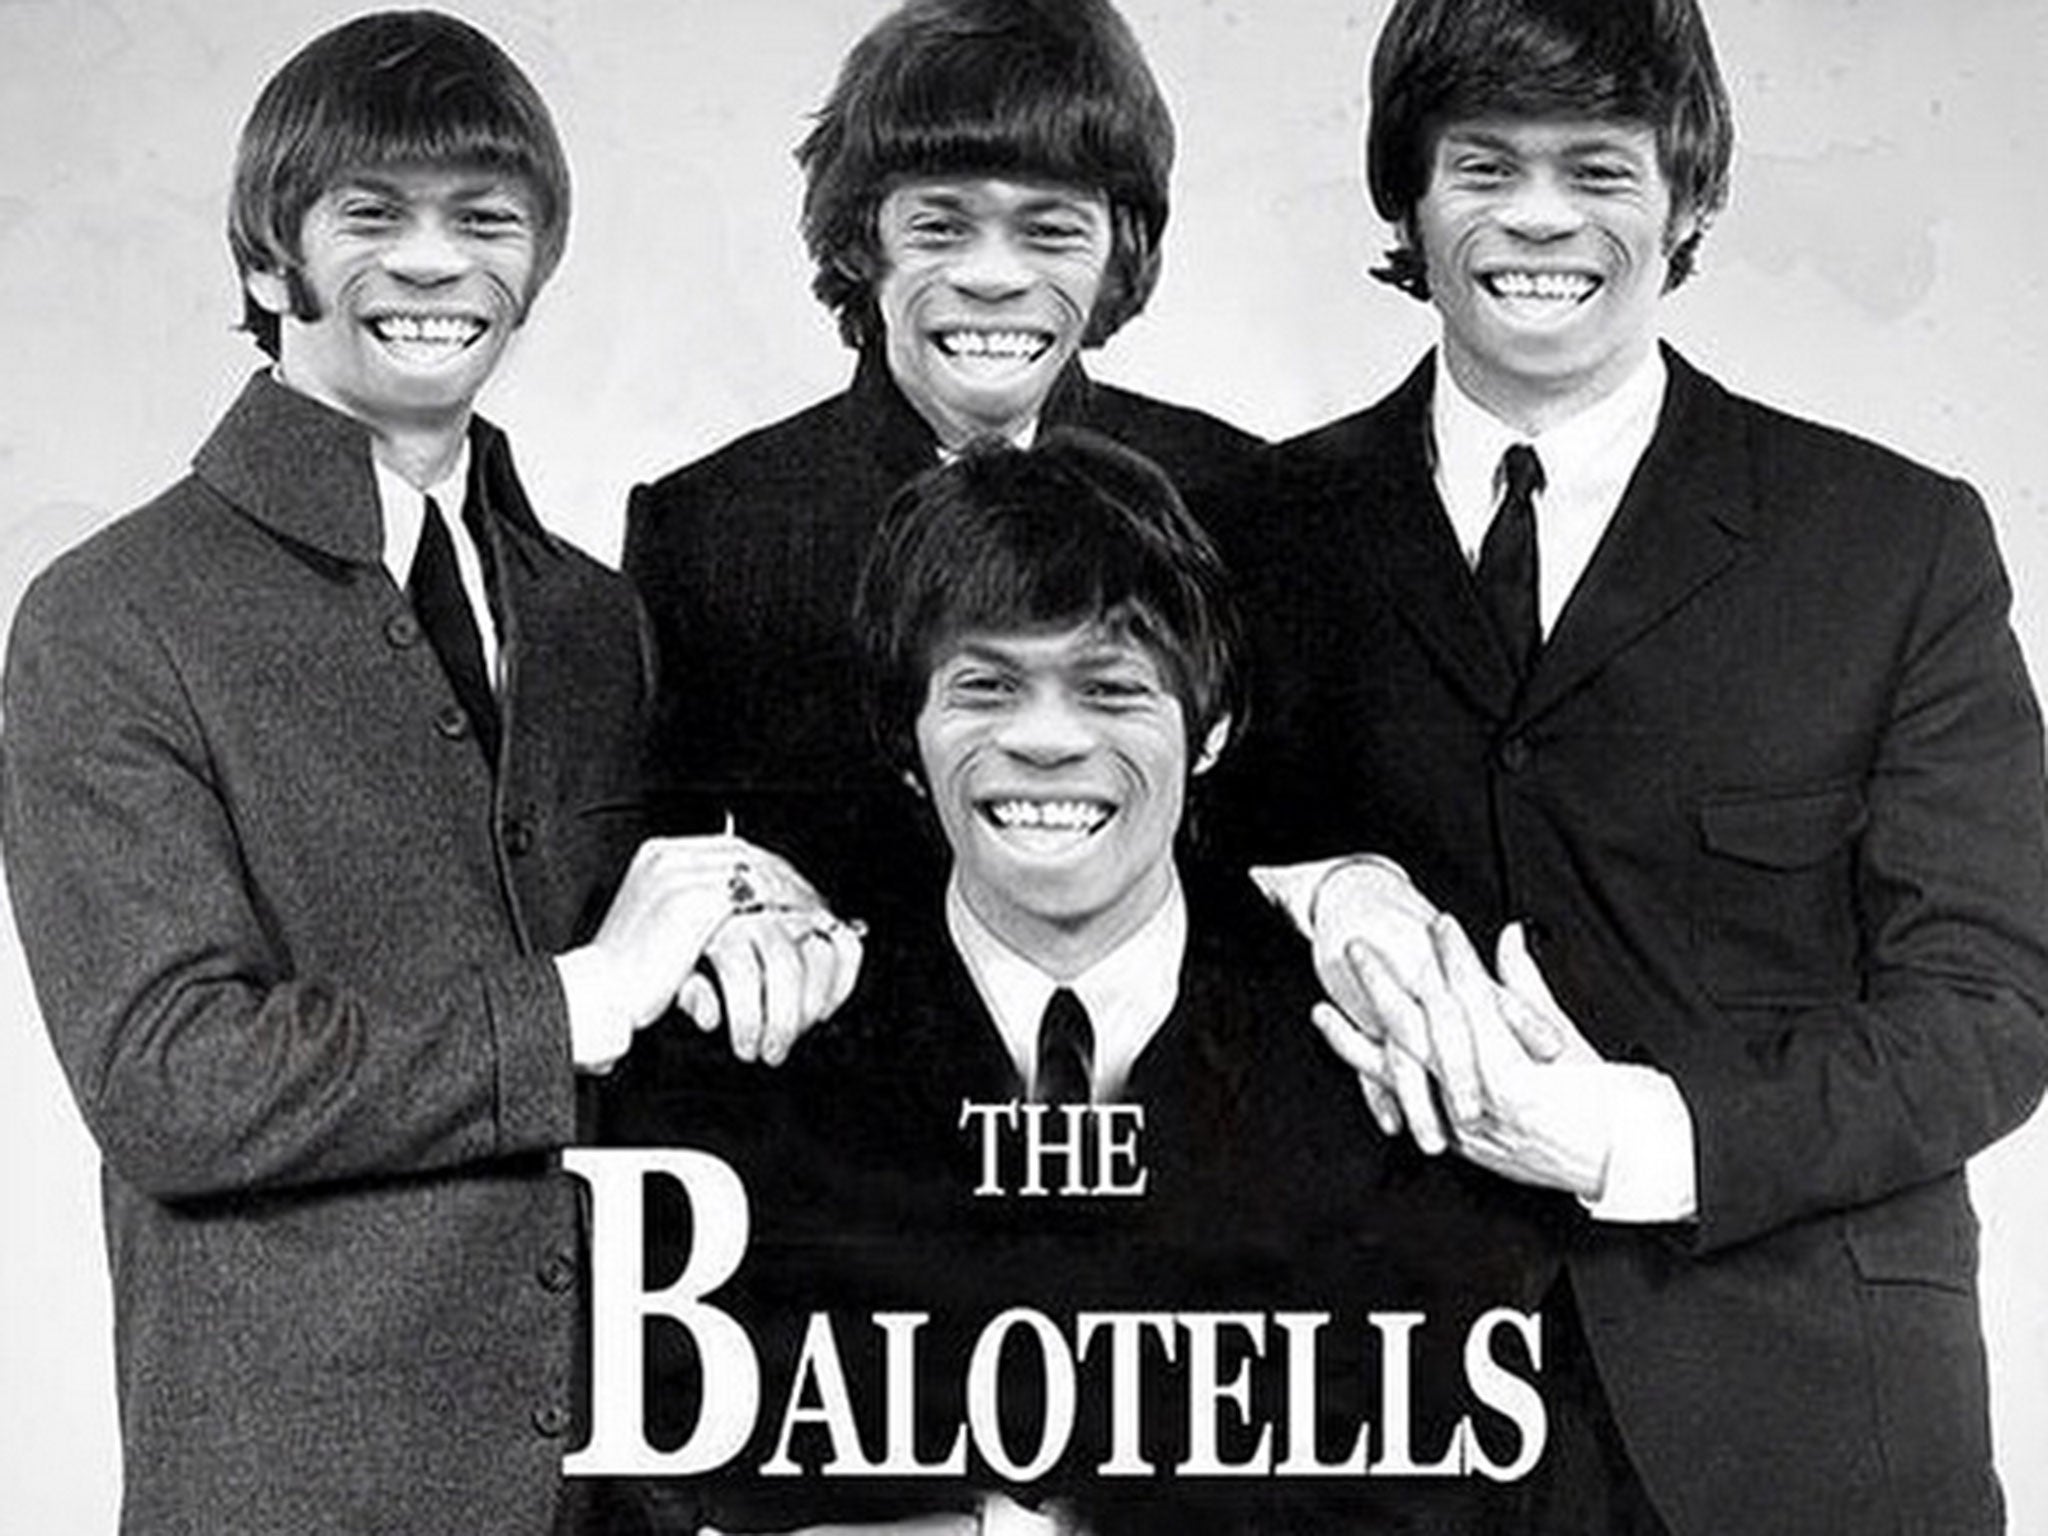 Mario Balotelli's Beatles picture he posted on Instagram